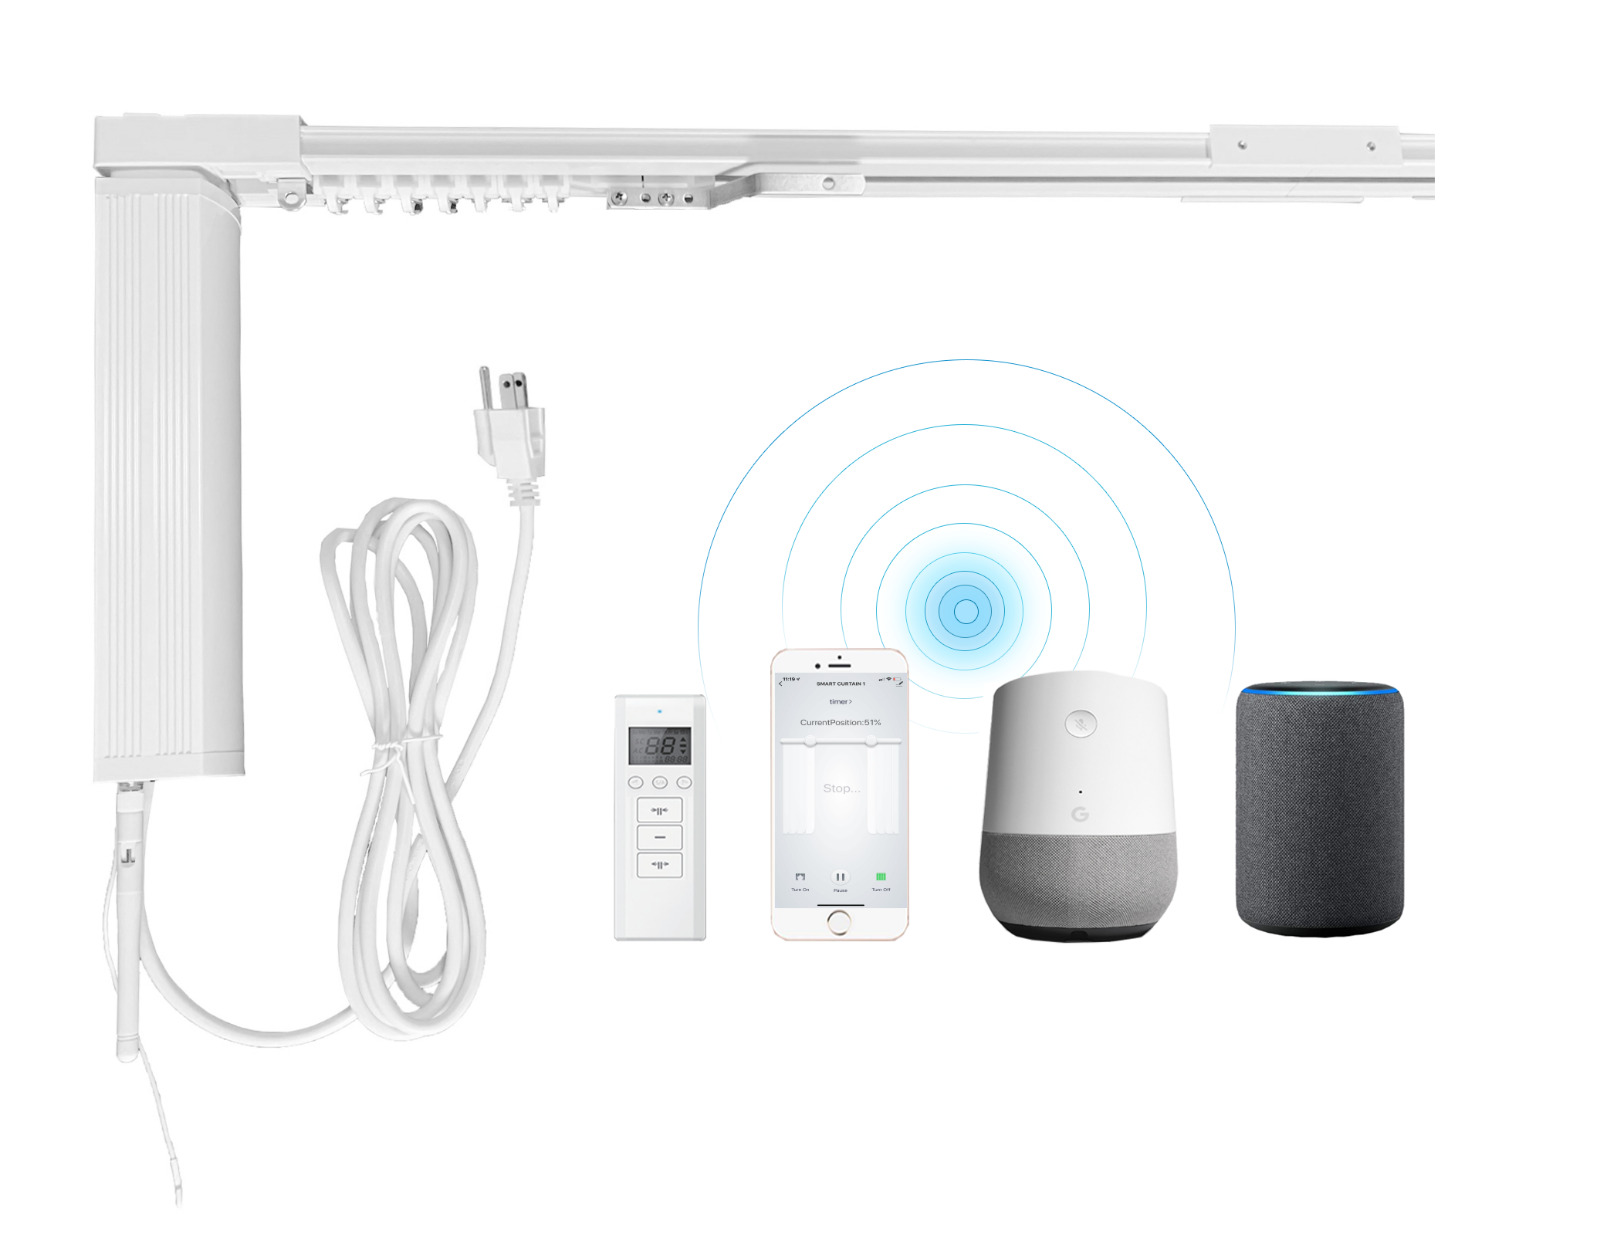 HC Smart Curtain System: WiFi Control, Heavy Duty, Work with Alexa and Google